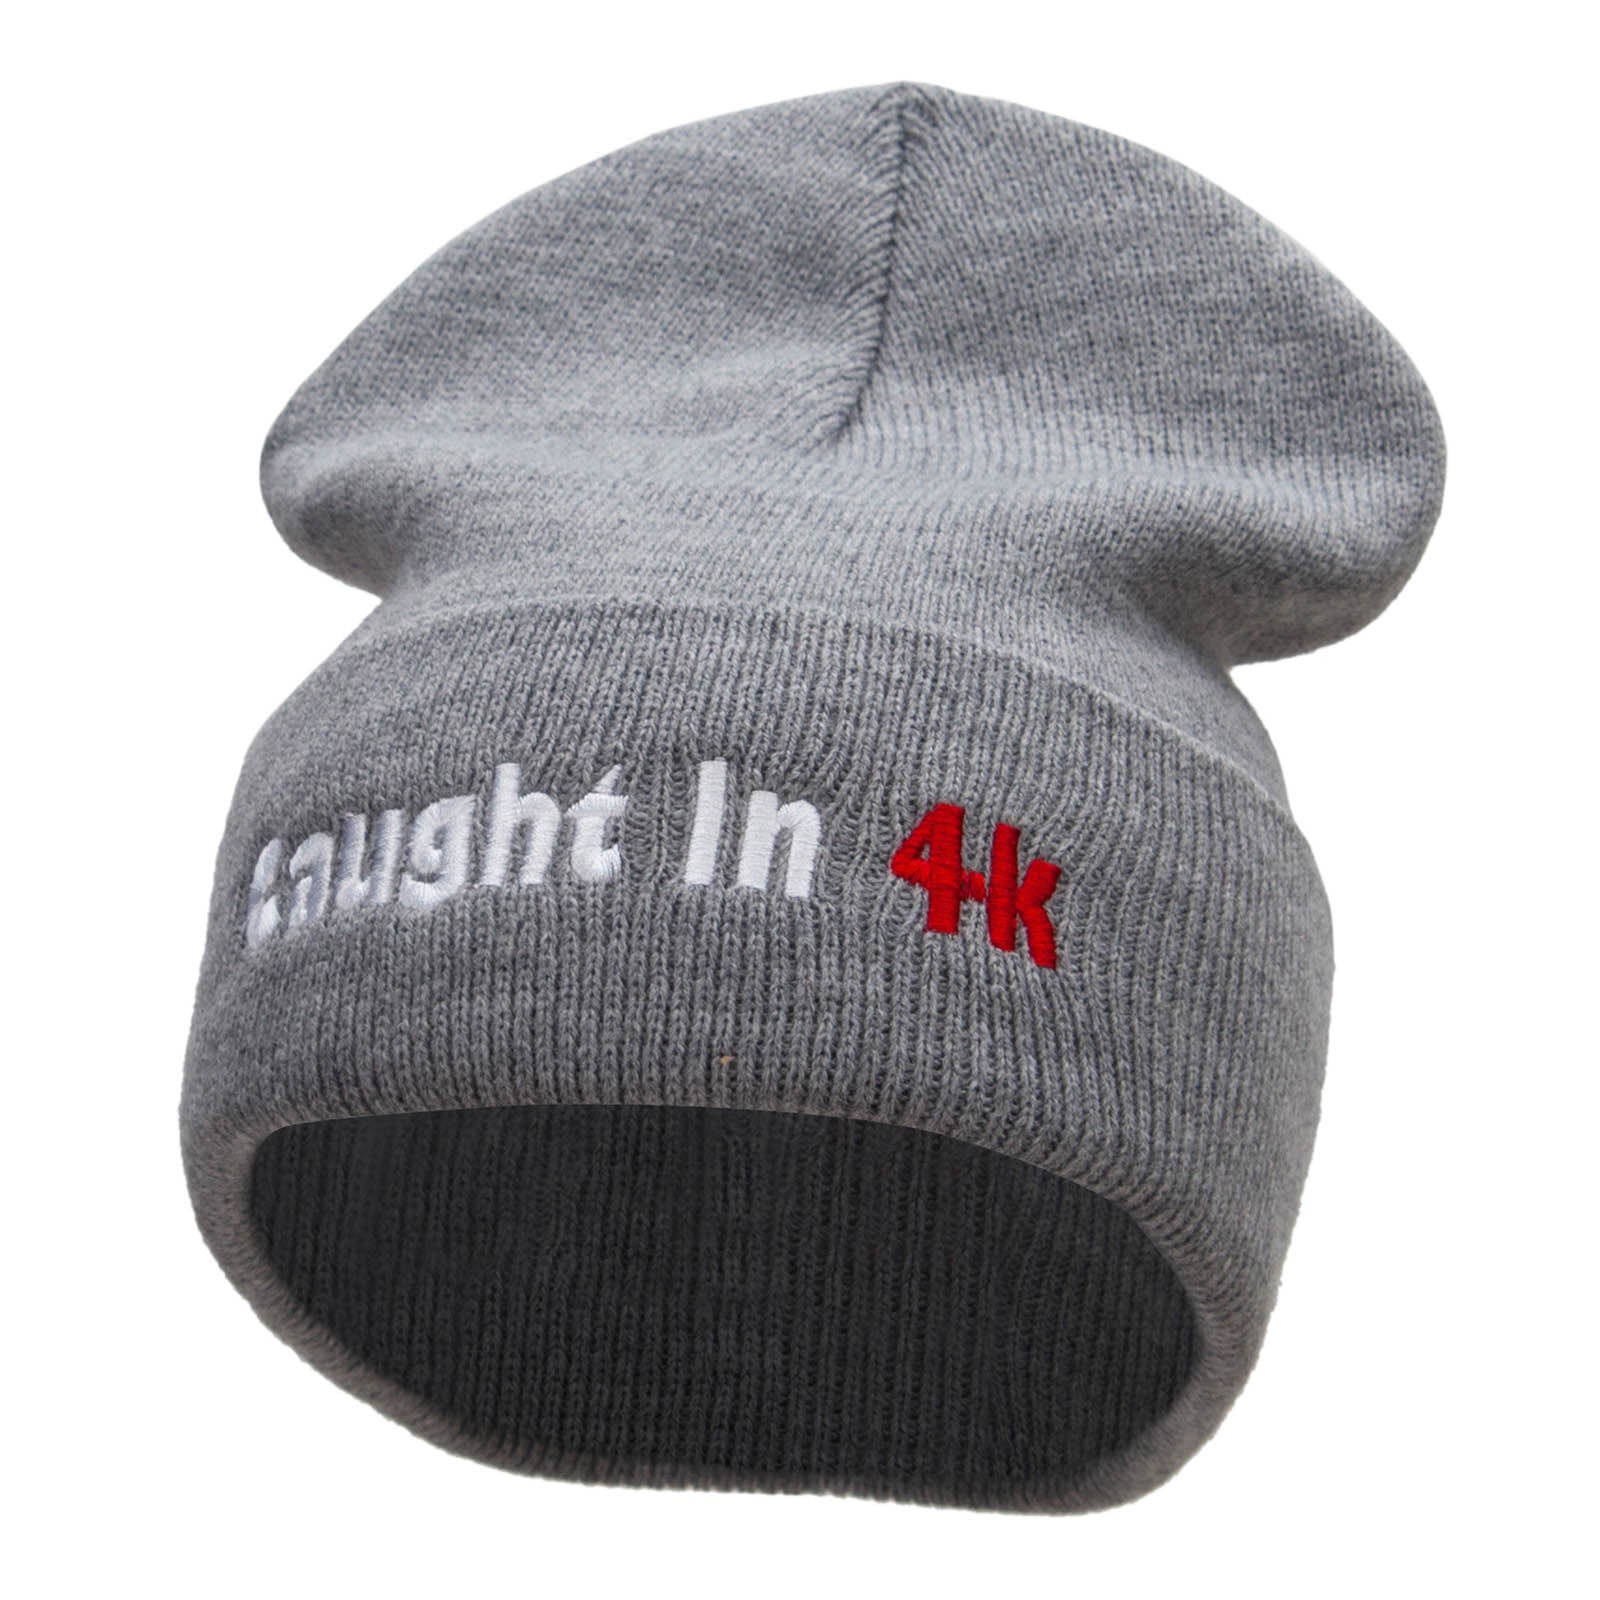 Caught in 4k Embroidered 12 Inch Long Knitted Beanie - Heather Grey OSFM